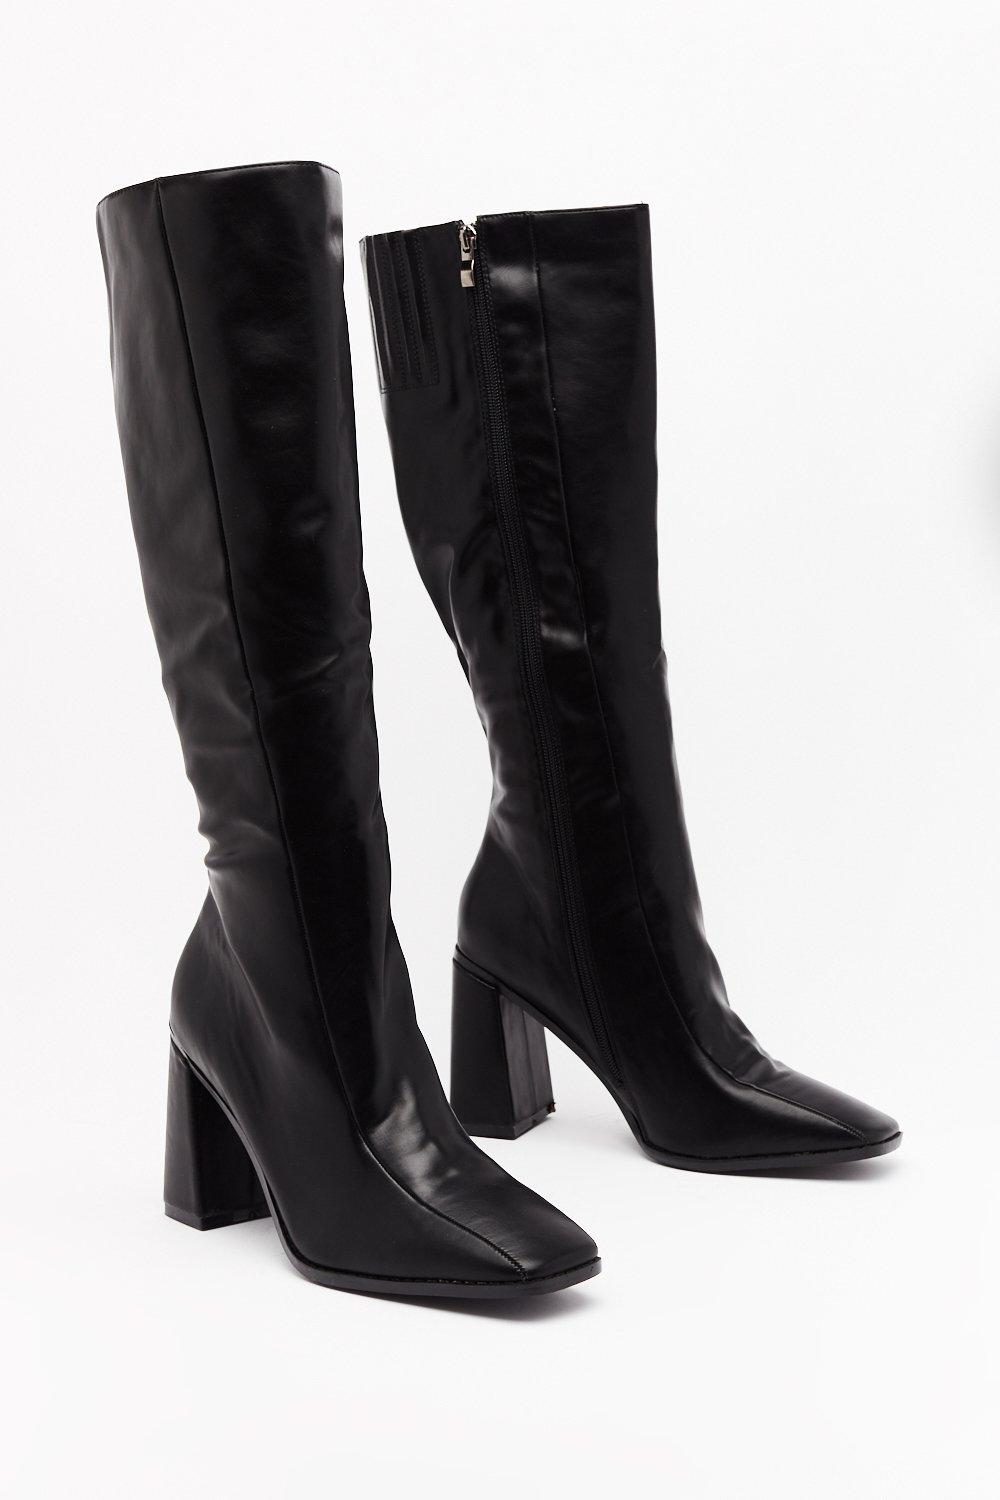 square toe leather boots